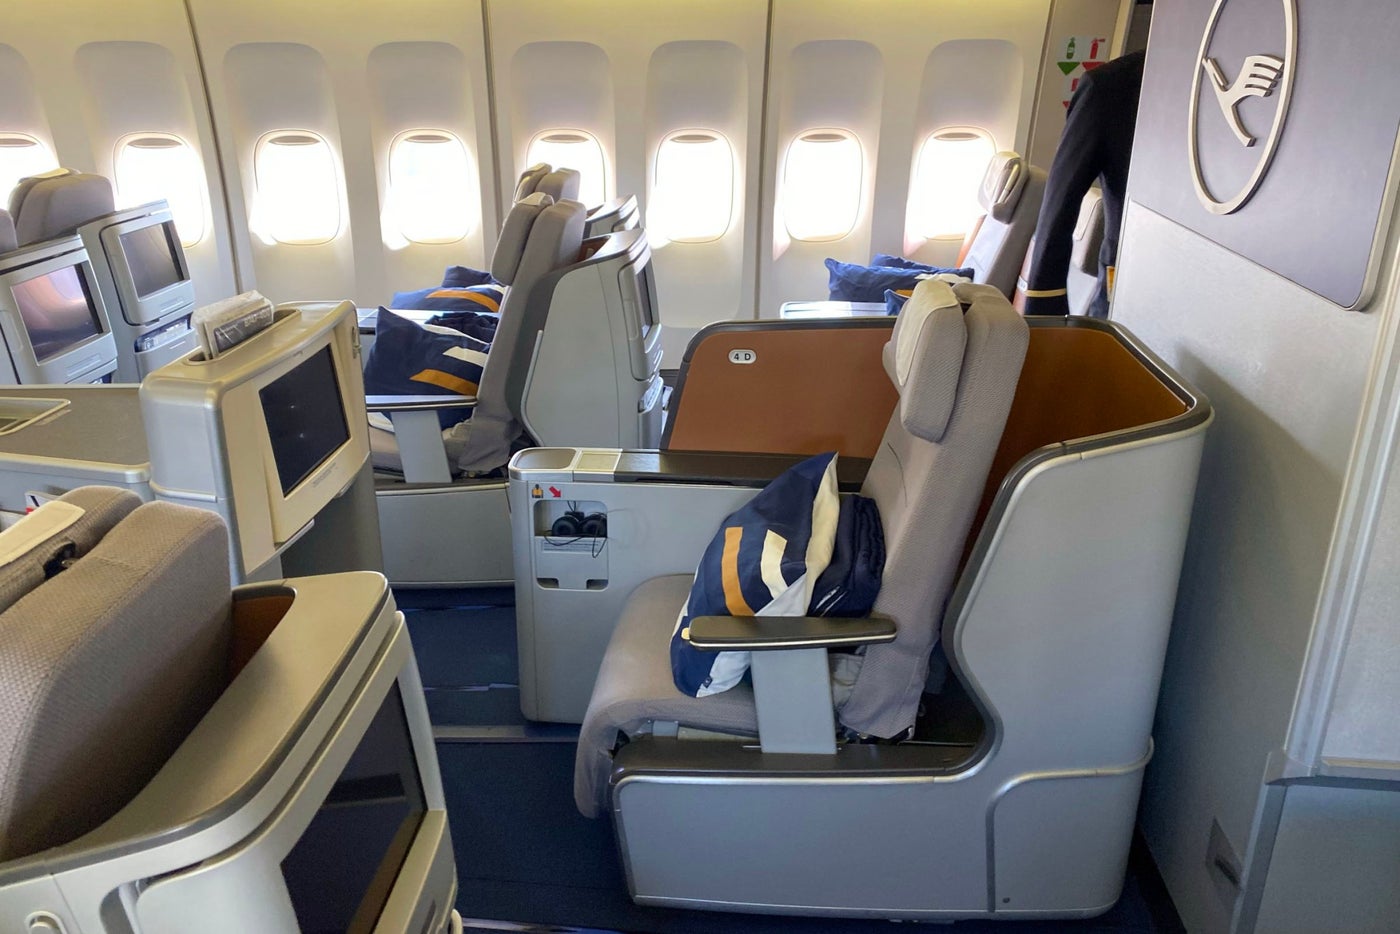 Worst businessclass cabins in the sky